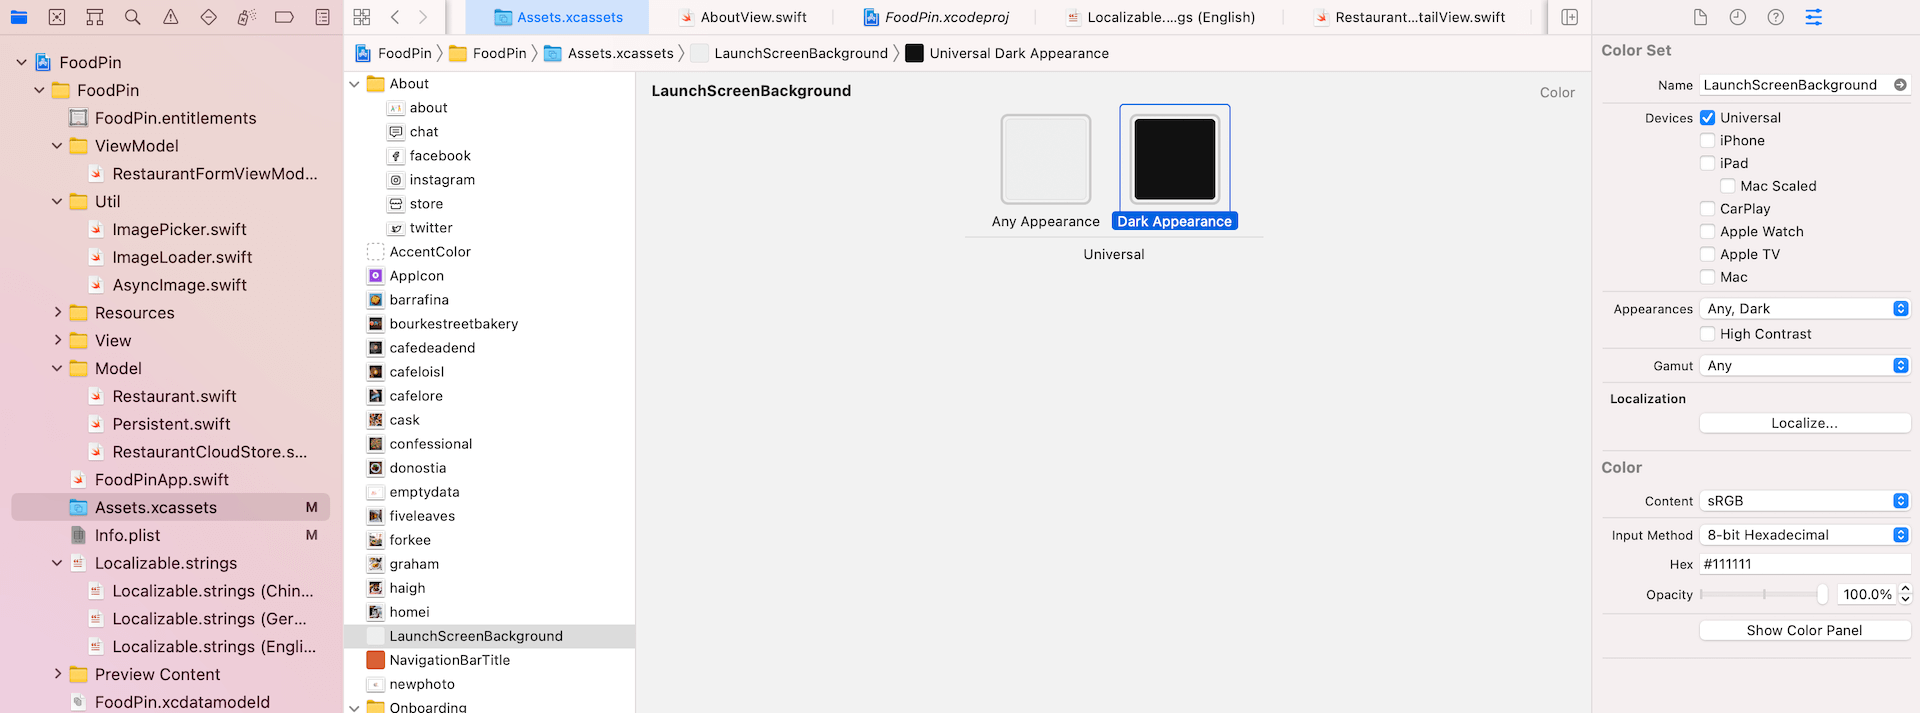 Creating a color set in asset catalog of Xcode